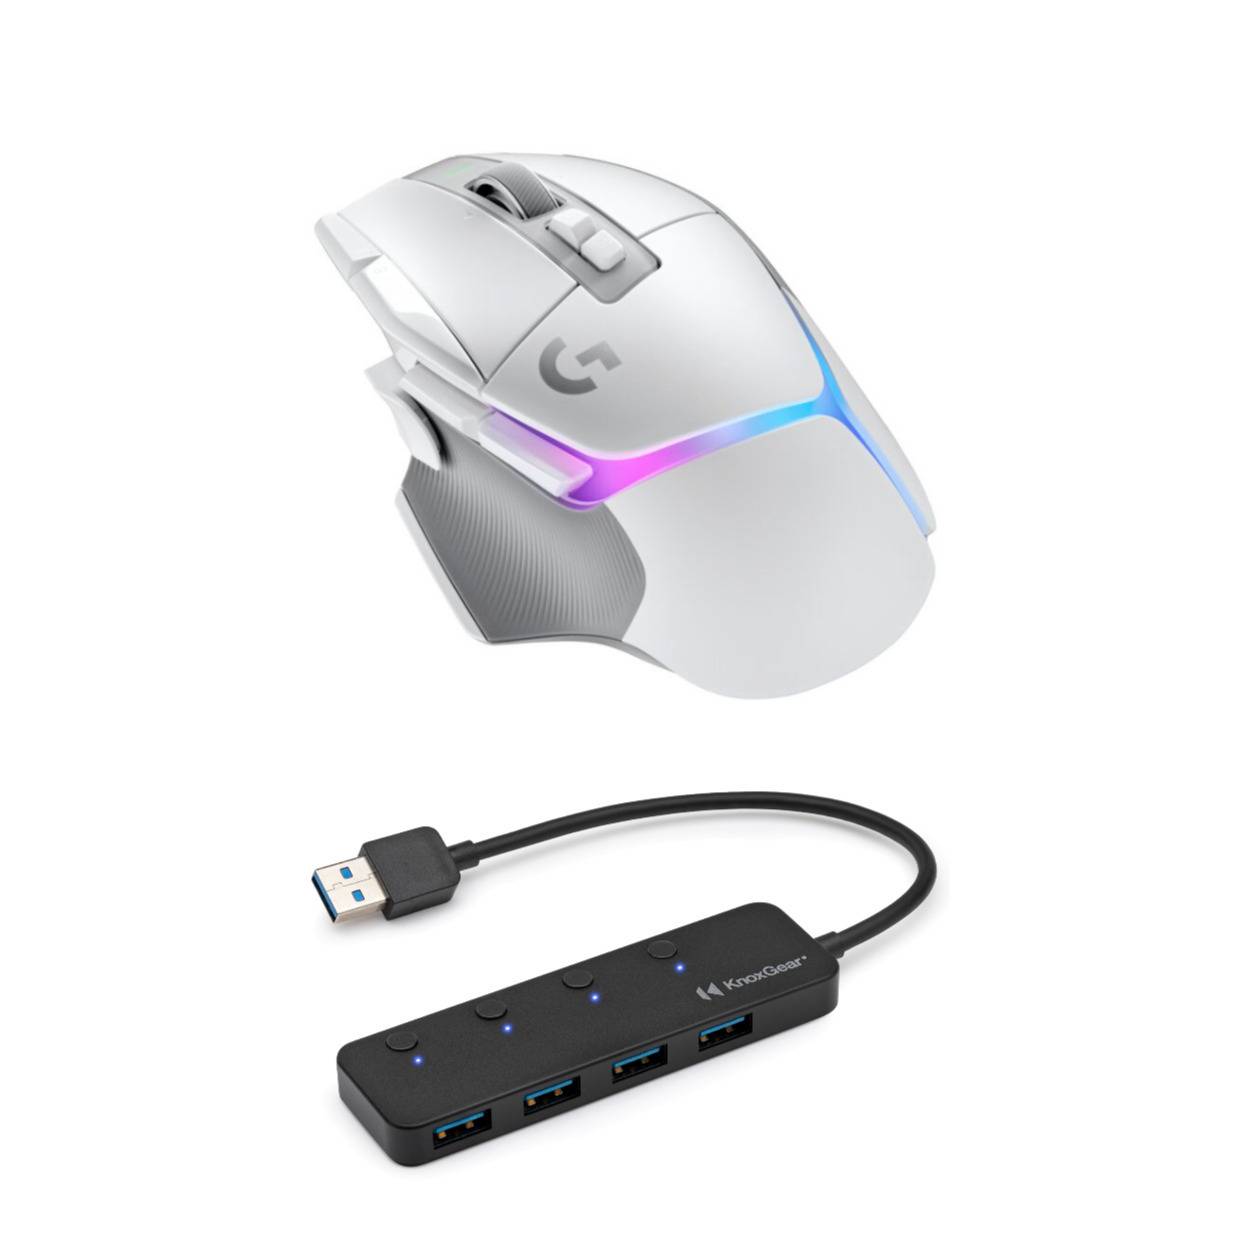 Logitech G502 X Plus Wireless Gaming Mouse (White) with 4-Port USB 3.0 Hub